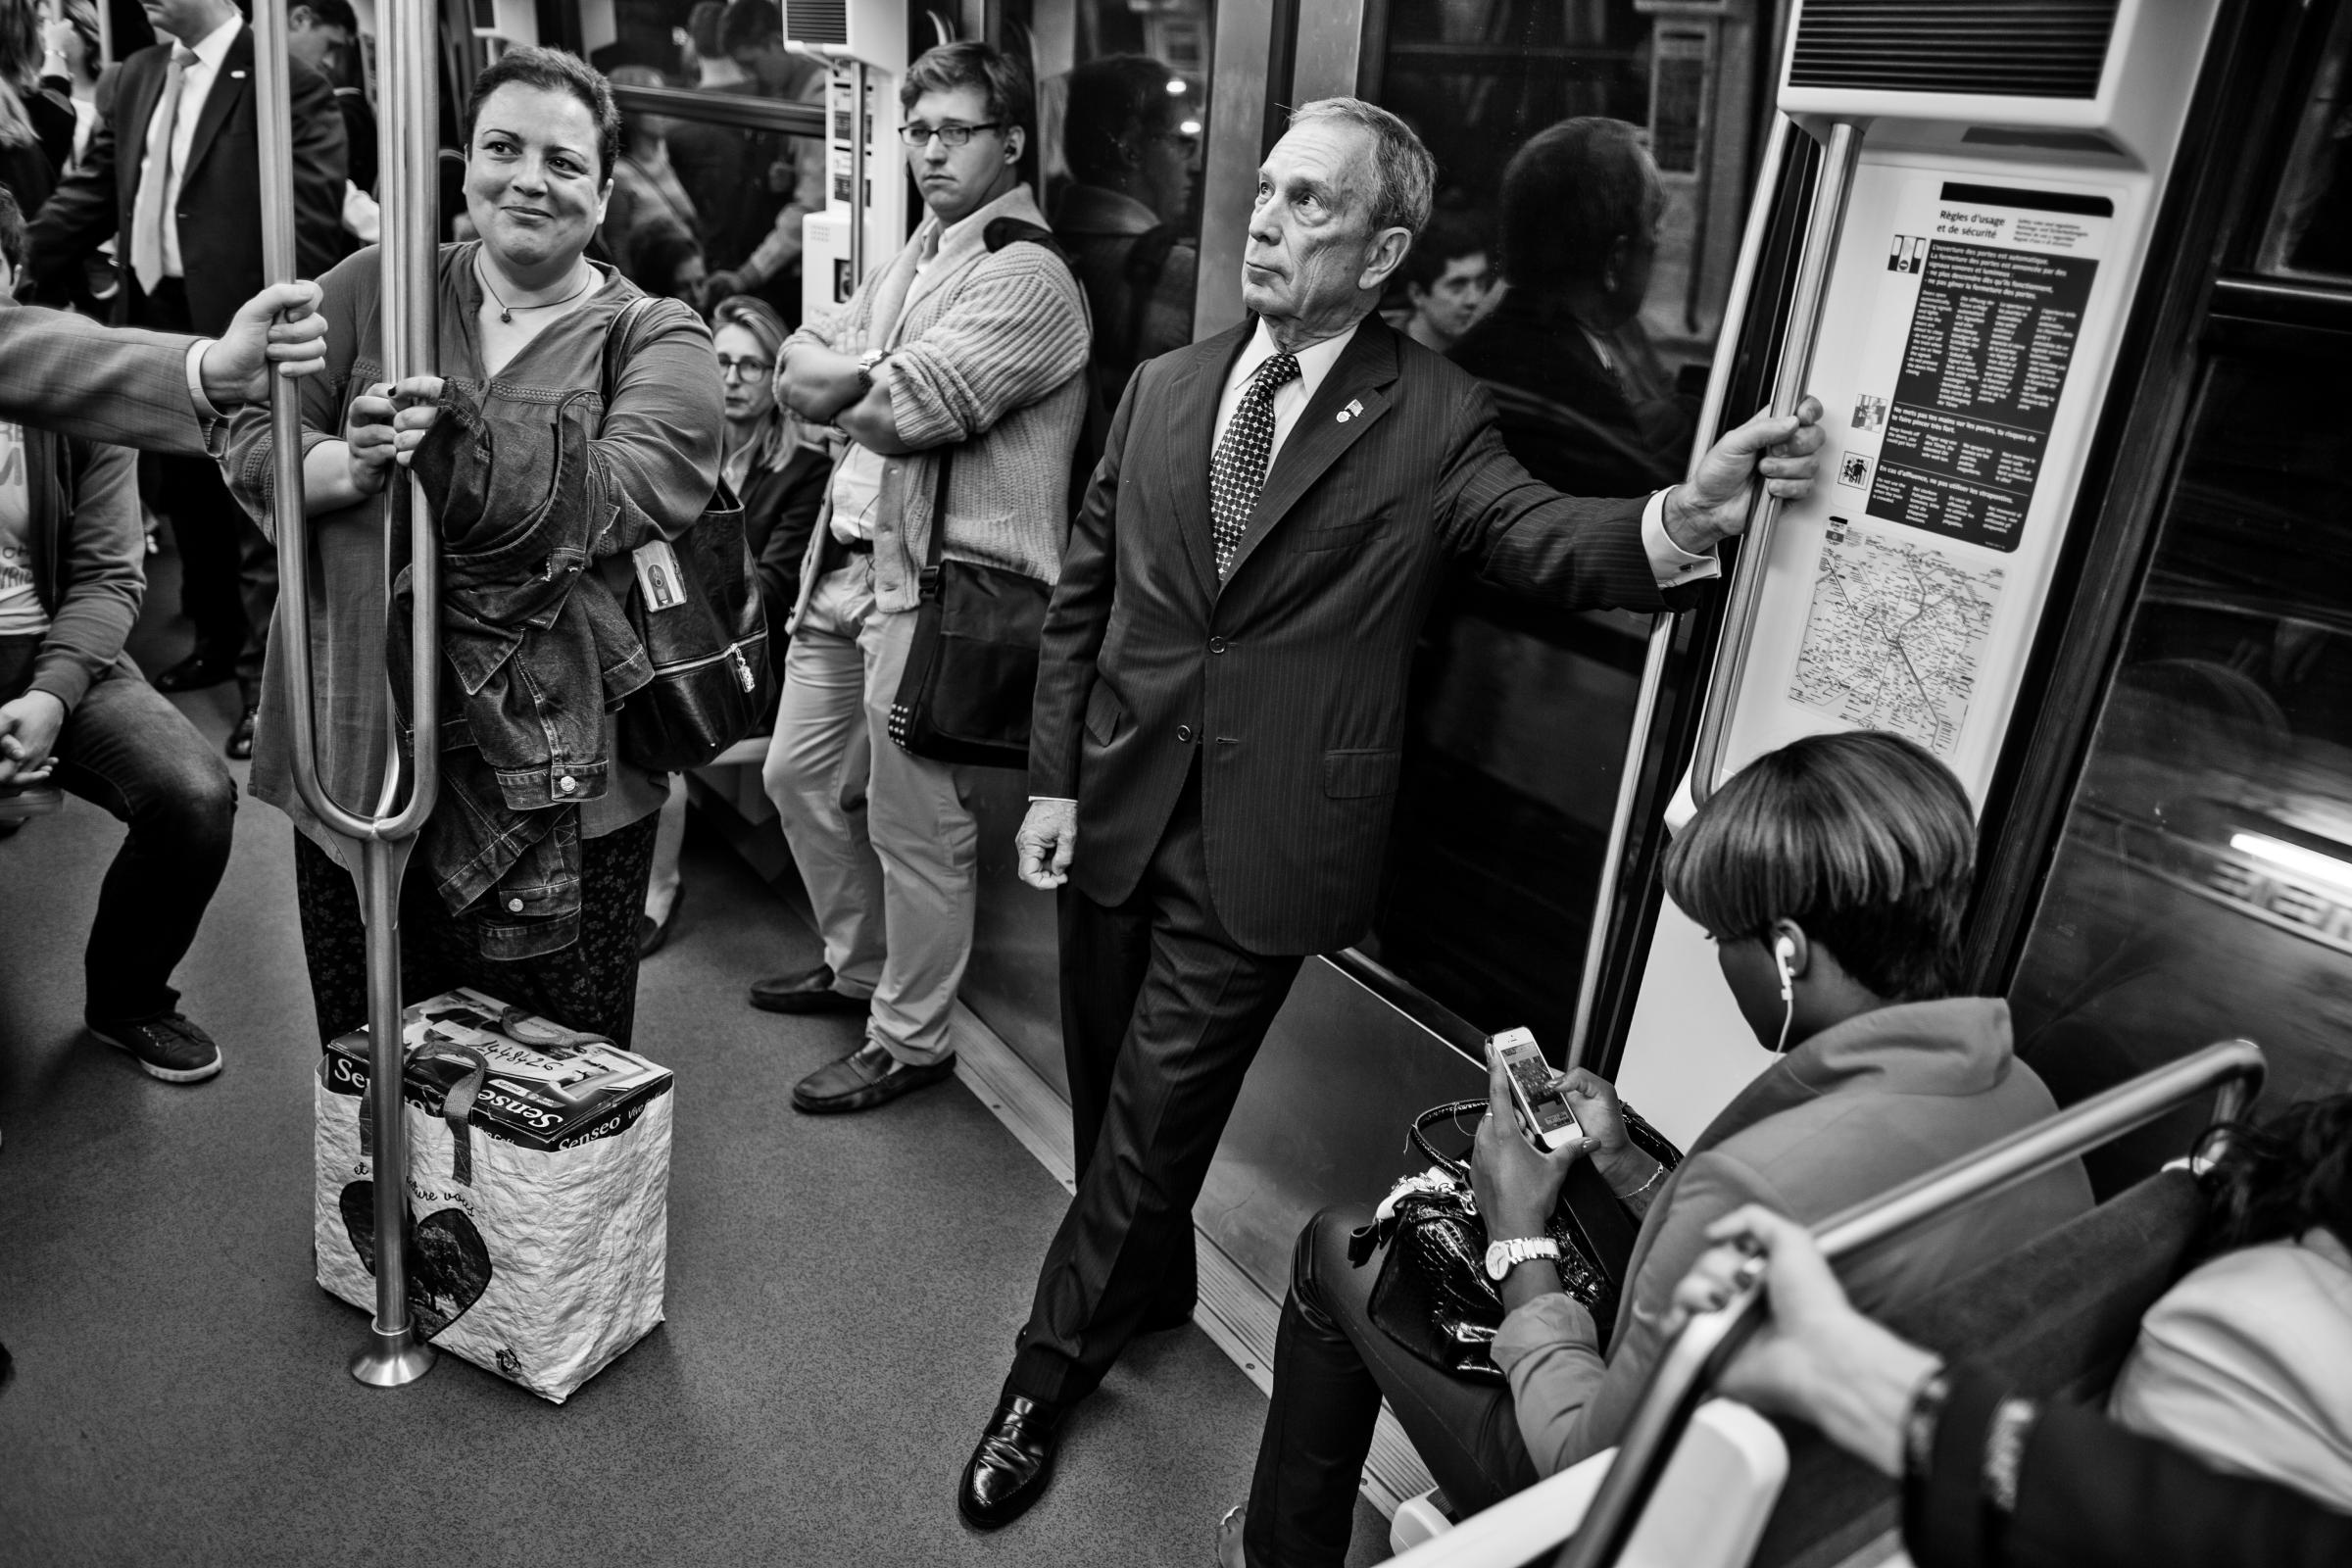 Paris, France - SEPTEMBER 23: Behind the scenes with New York Mayor Michael Bloomberg on the 23rd September 2013 in Paris, France.  Here Mayor Bloomberg takes the Paris metro back to his hotel after finishing up his meetings for the day. (Photos by Charles Ommanney/ Reportage by Getty Images)